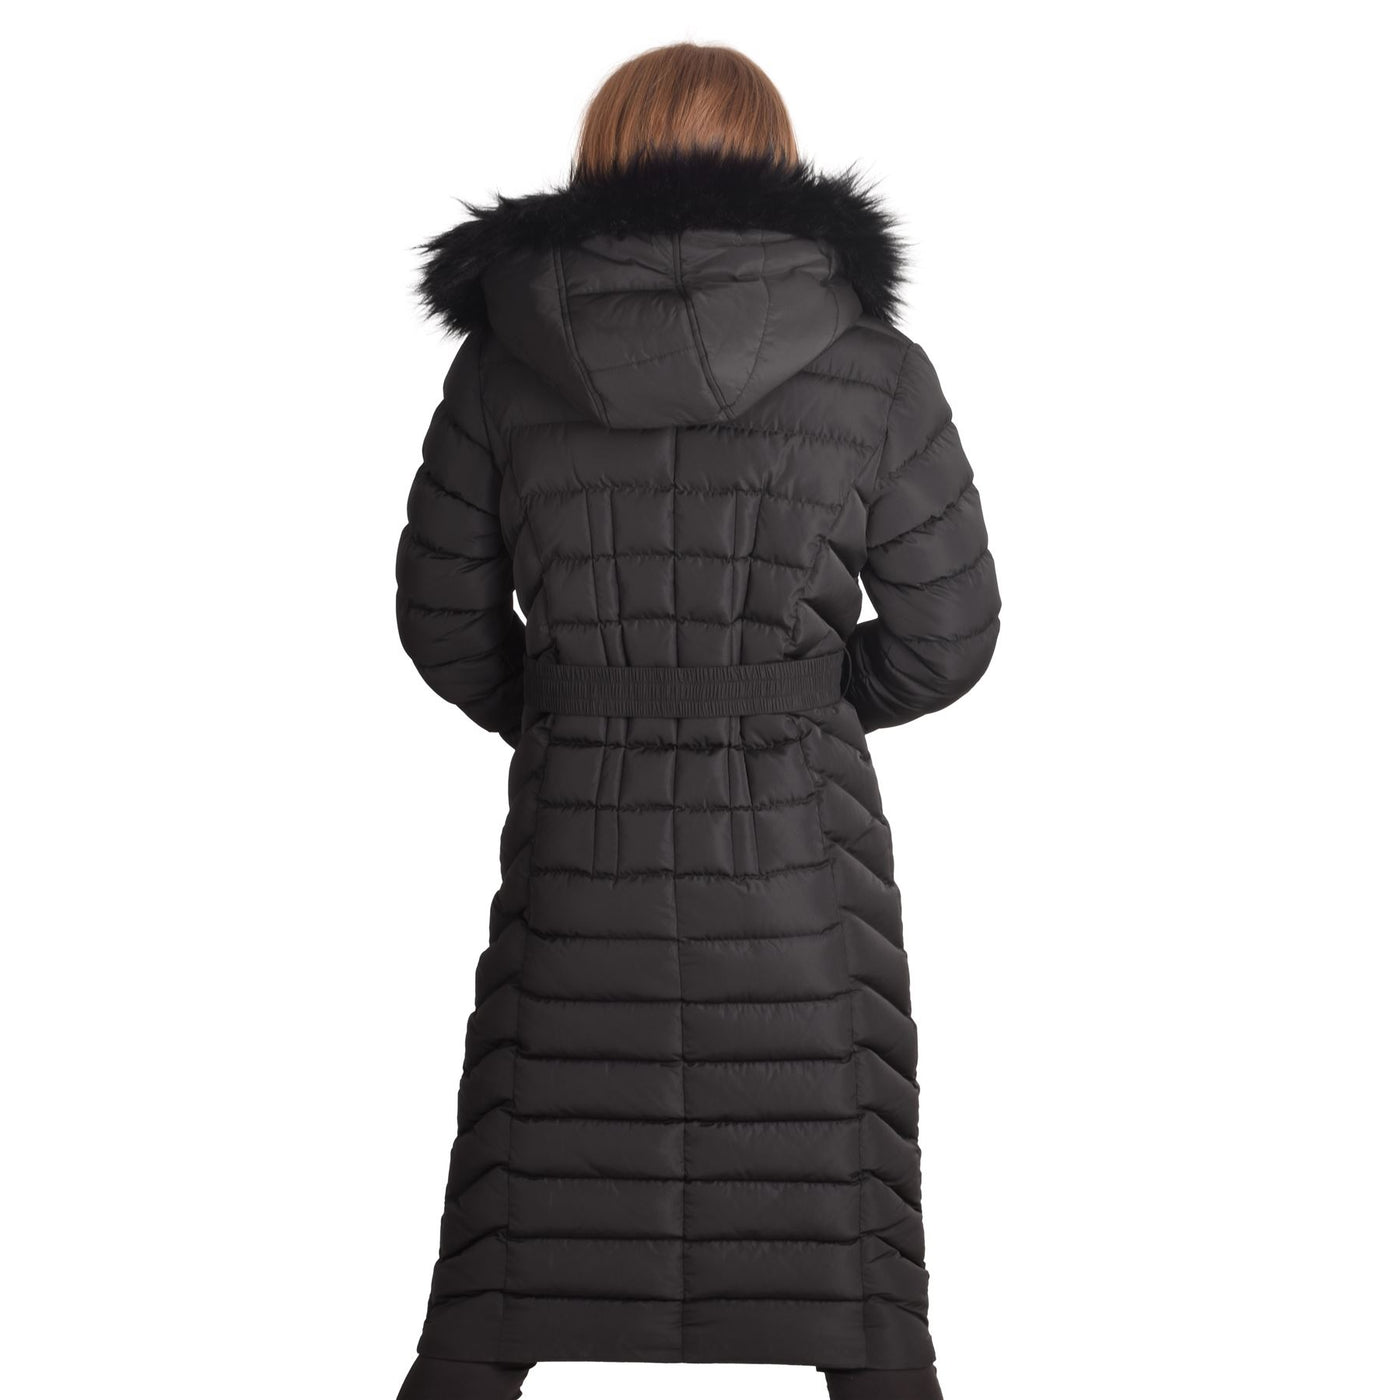 Spindle Womens Maxi Long Hooded Fur Puffer Quilted Parka Coat Extra Long | Ladies Full Length Winter Jacket with Hood and Belt